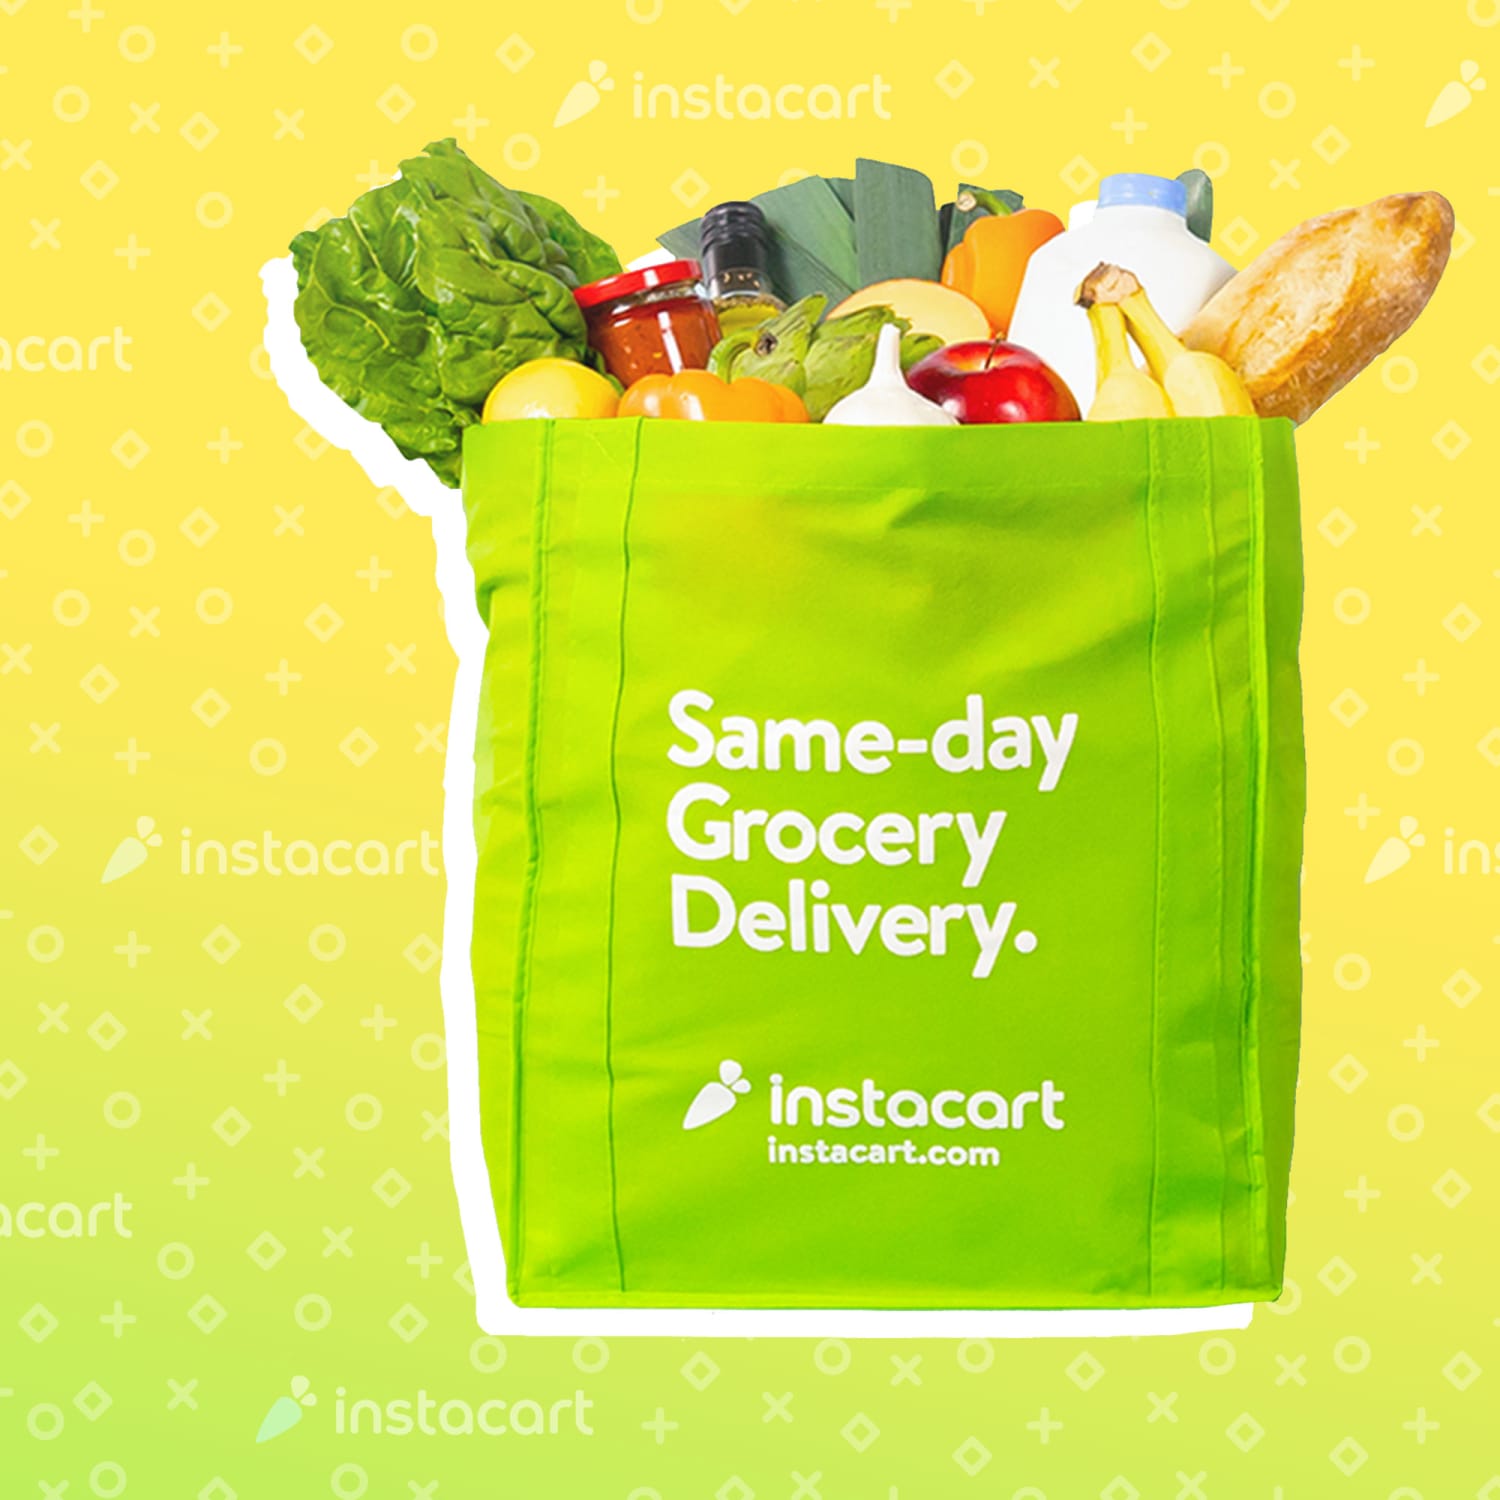 How Instacart Grocery Delivery Works And What It Costs Kitchn